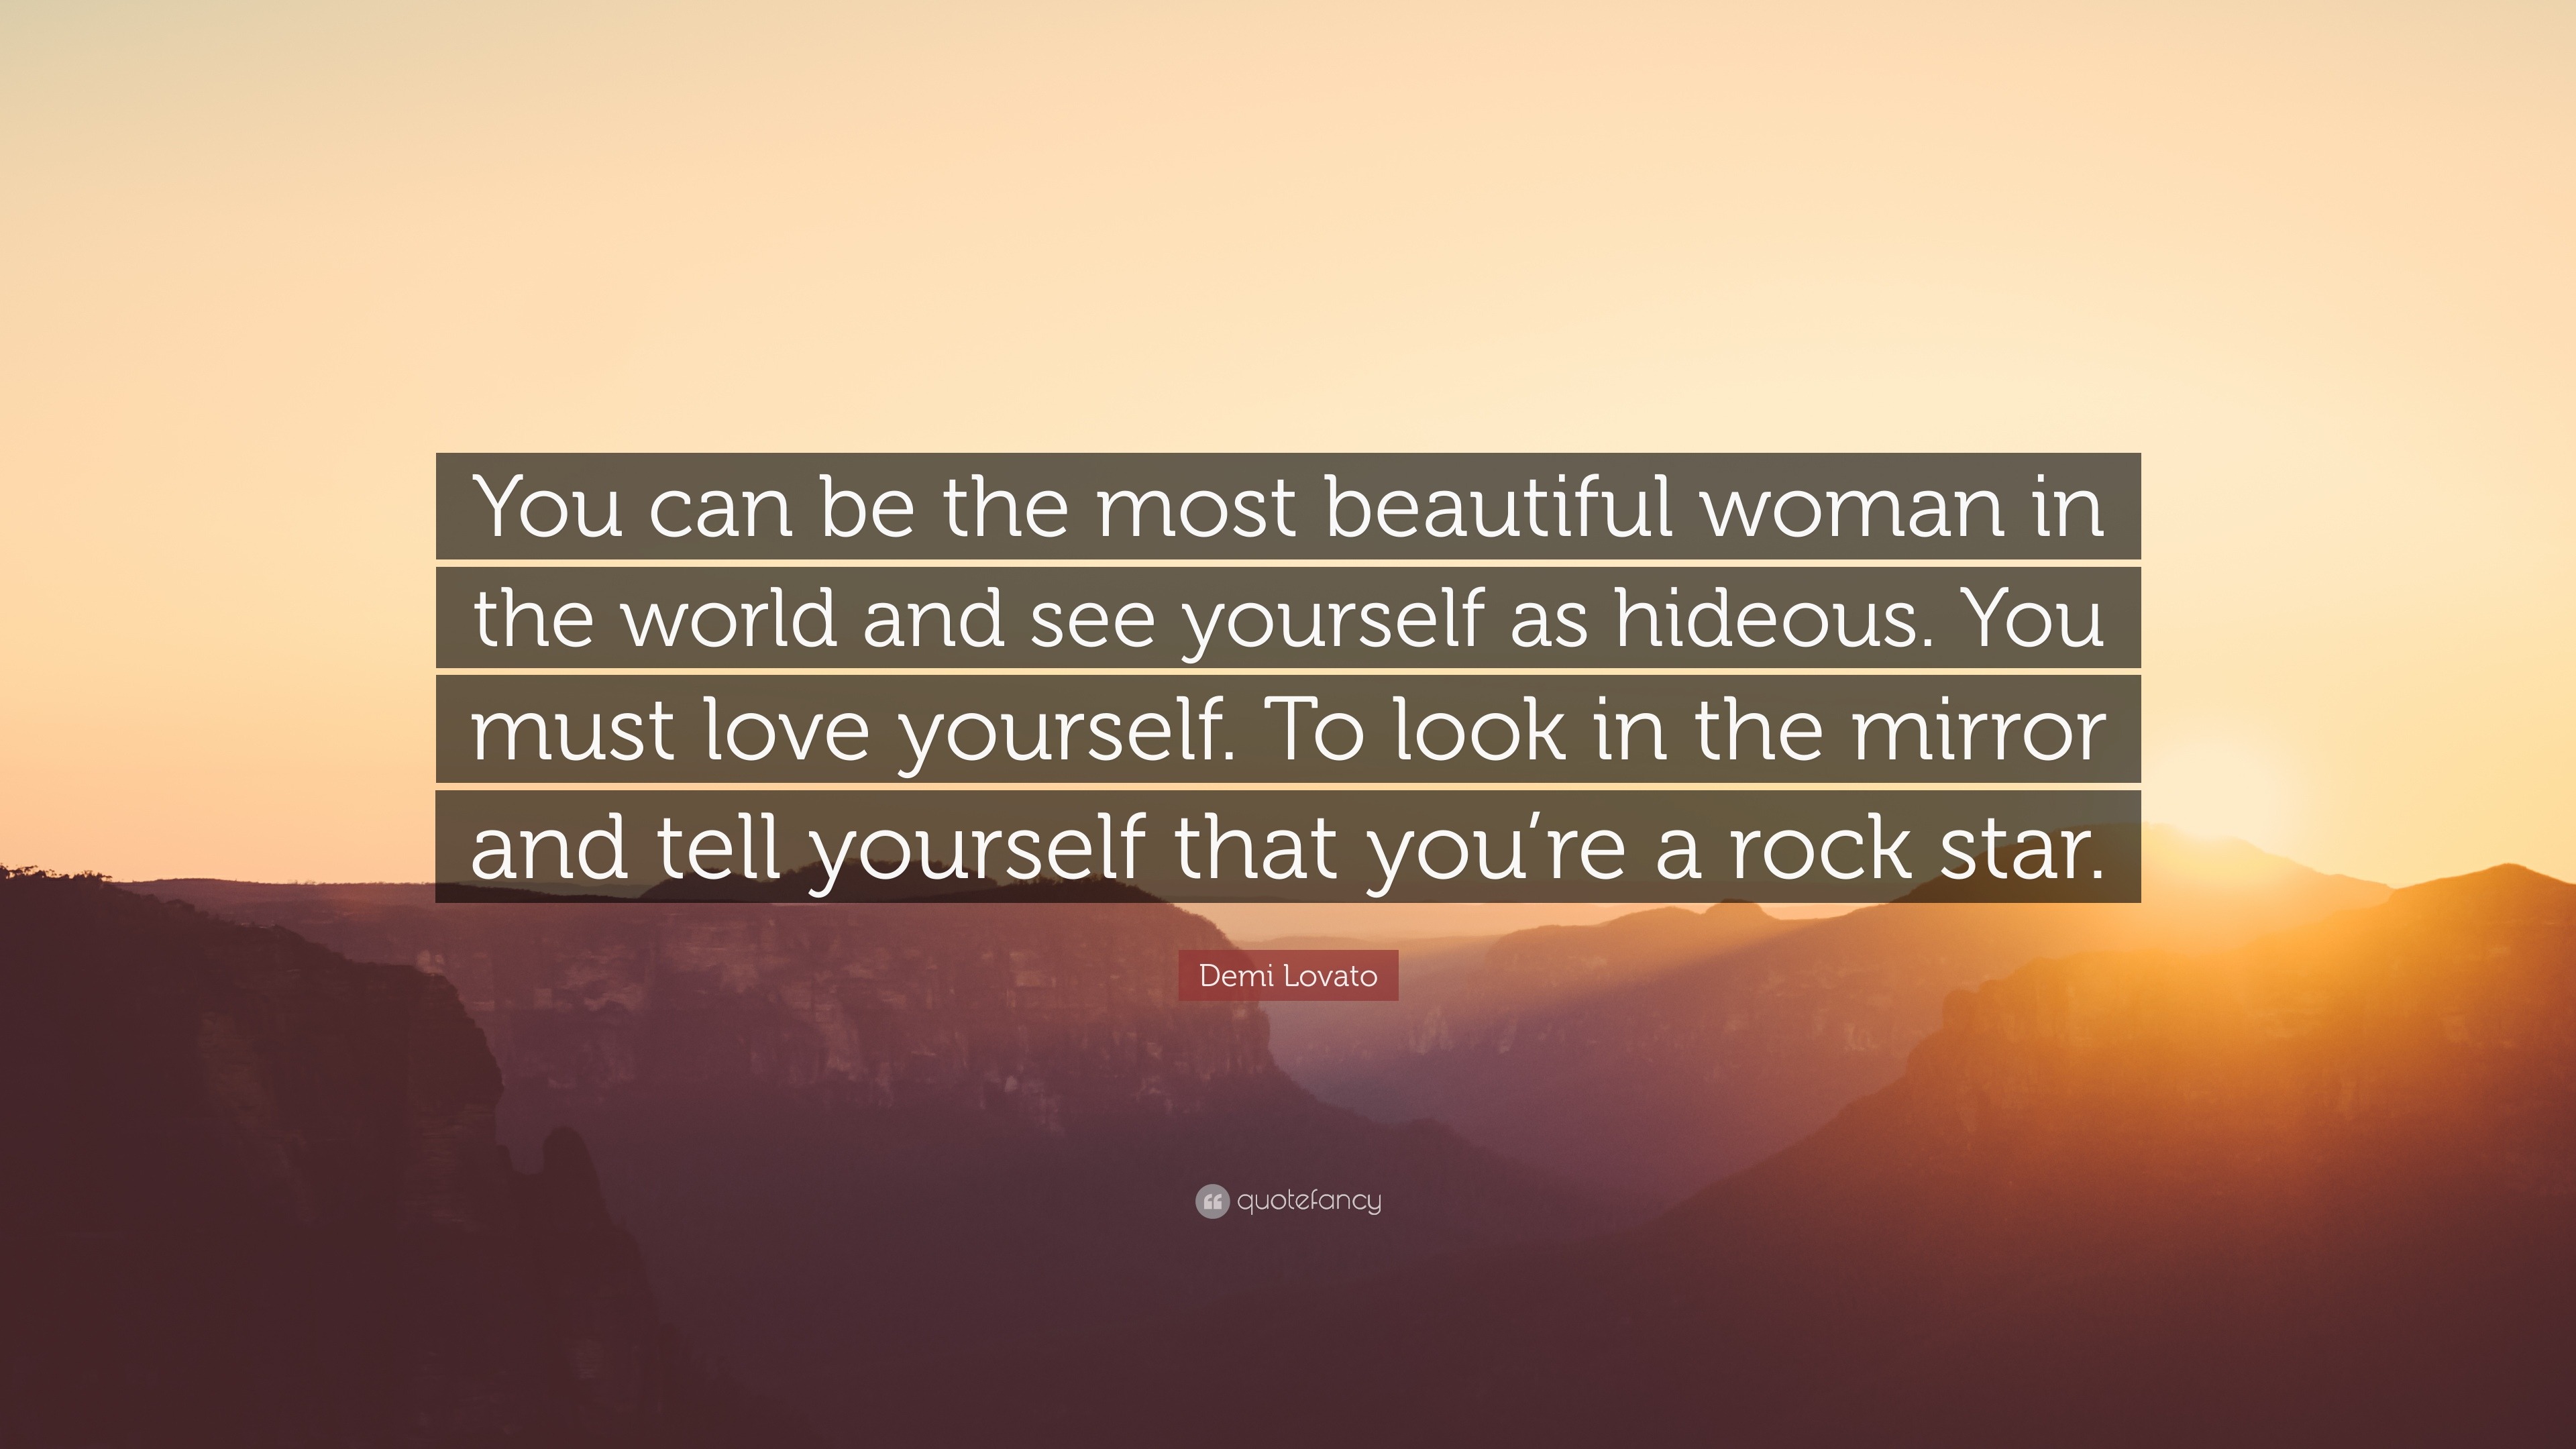 Demi Lovato Quote “You can be the most beautiful woman in